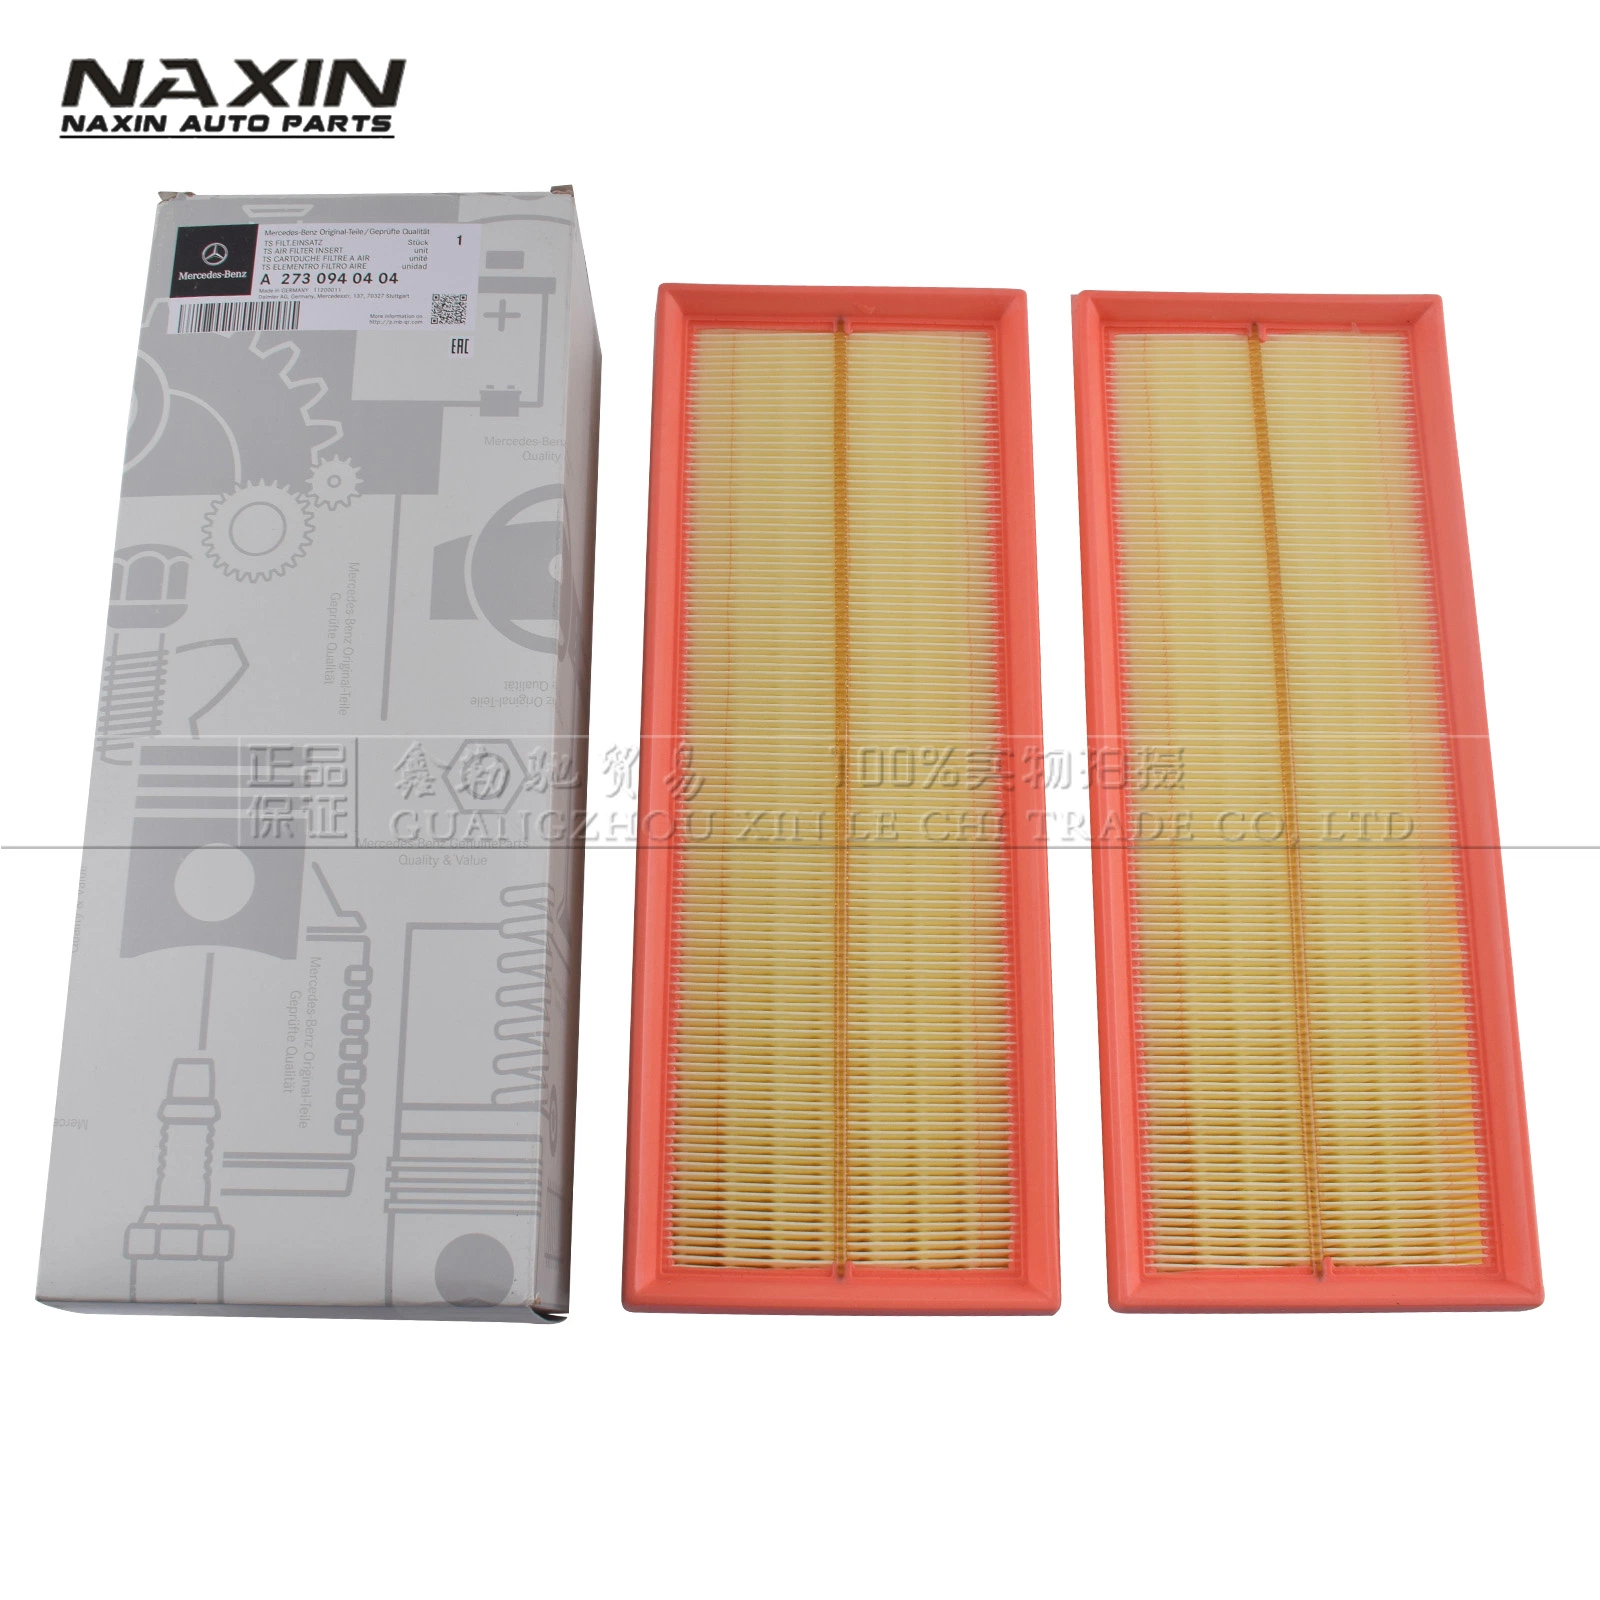 Hot Selling High Quality Auto Air Filter for Mercedes-Benz A2730940404